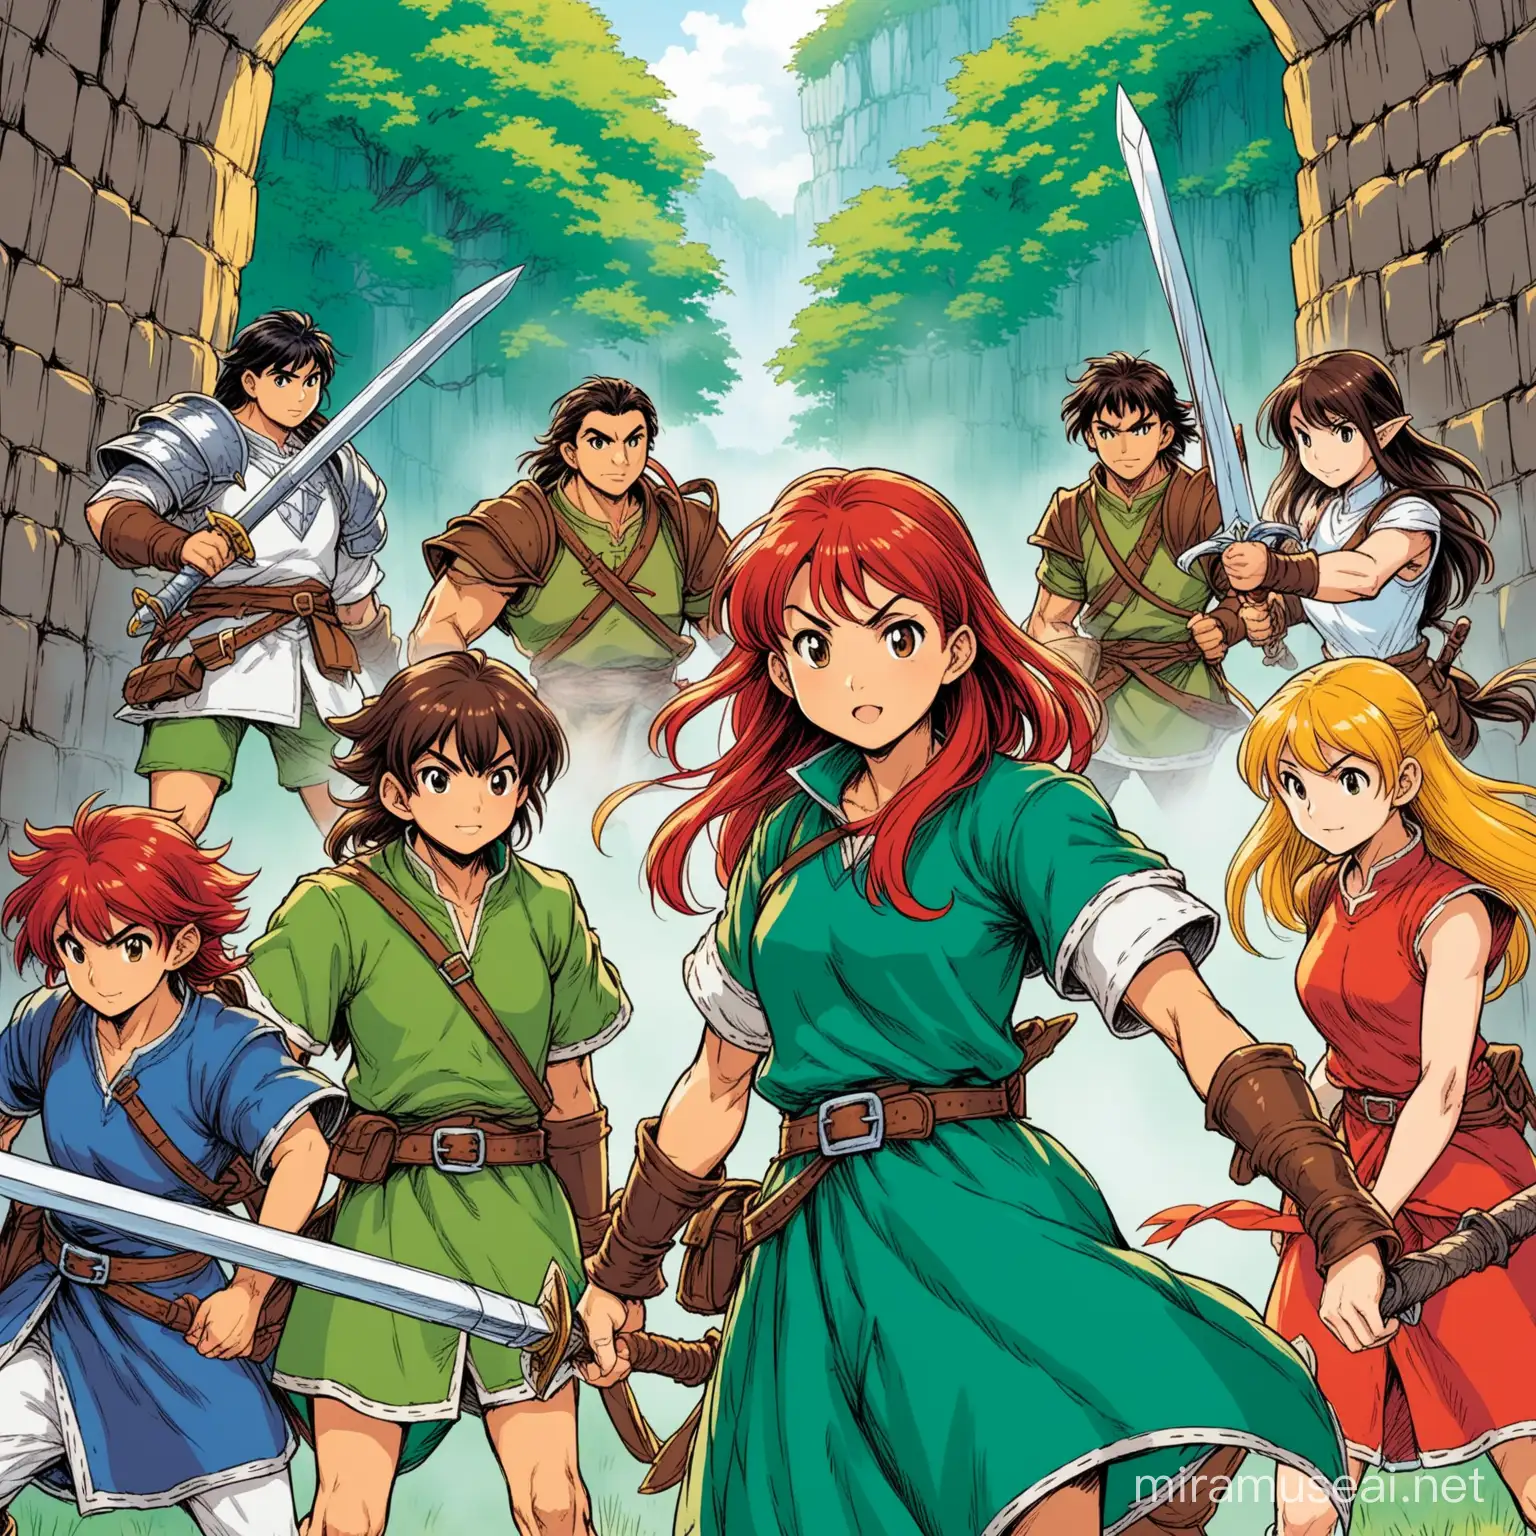 human fighter dungeons and dragons ghibli style anime manga dnd fantasy